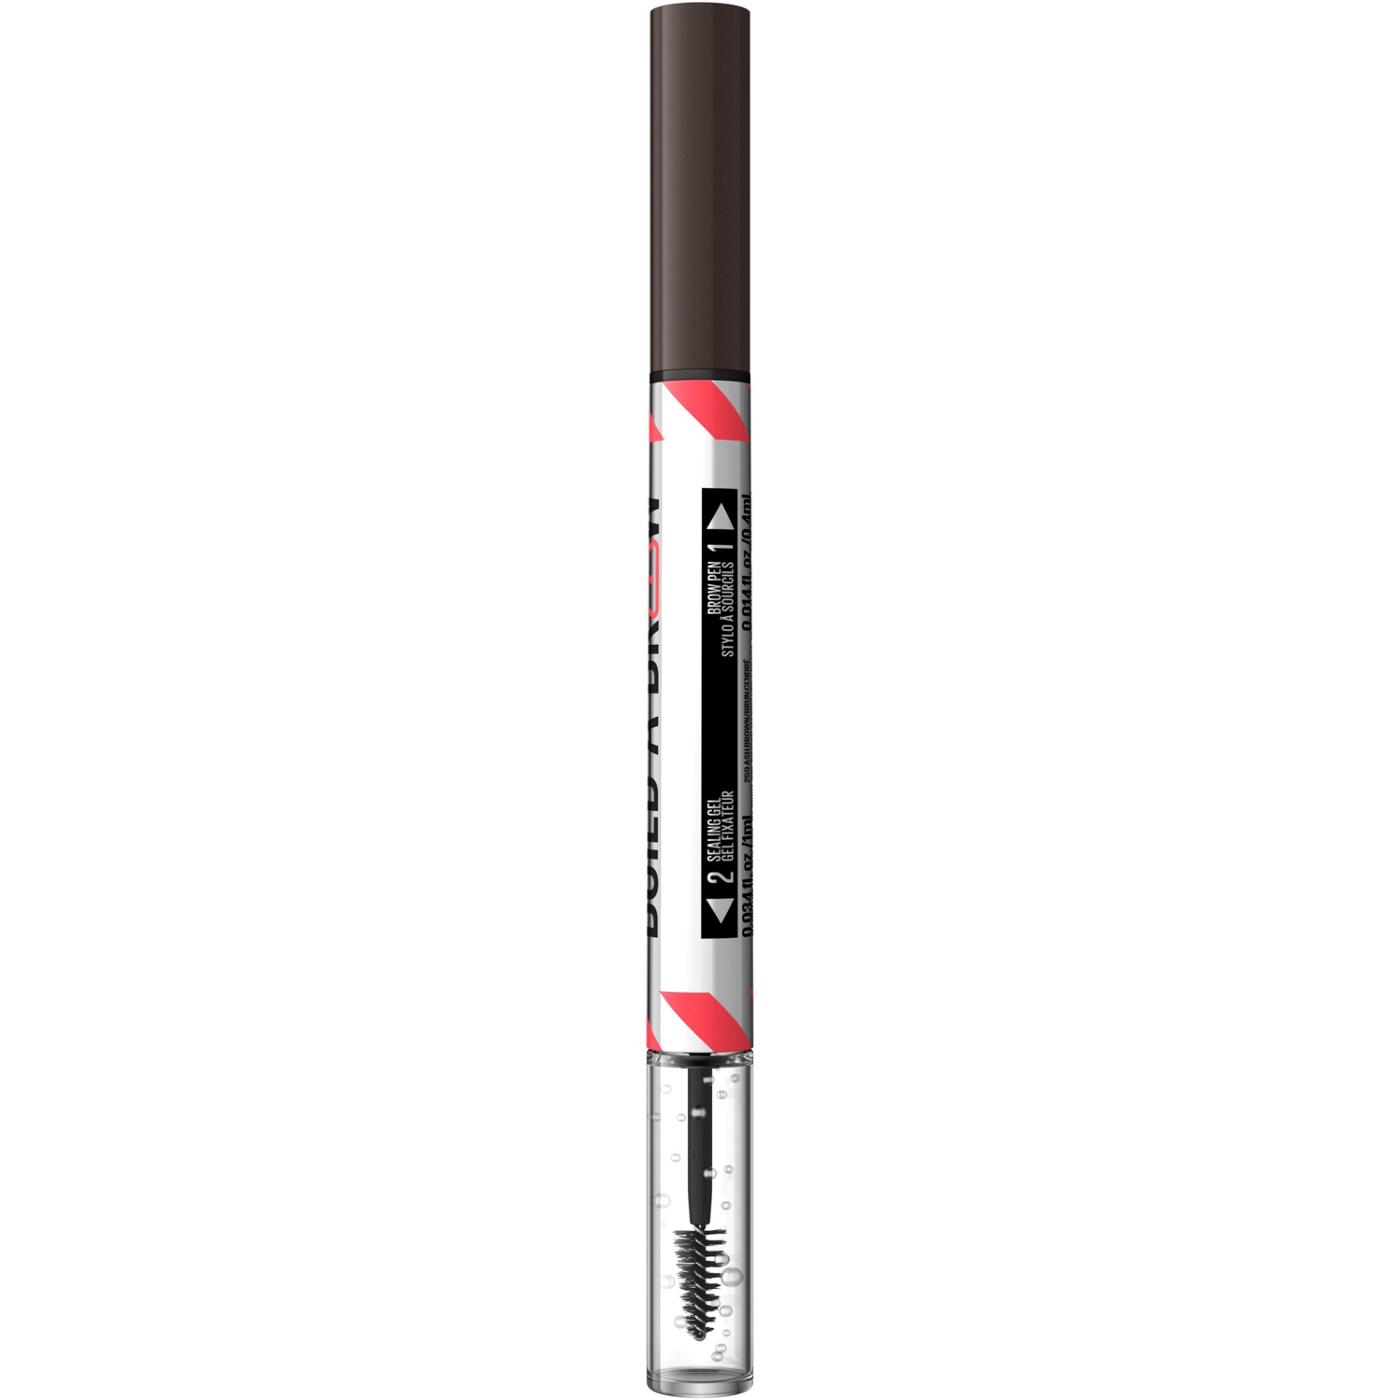 Maybelline Build A Brow 2 In 1 Brow Pen - Ash Brown; image 12 of 17